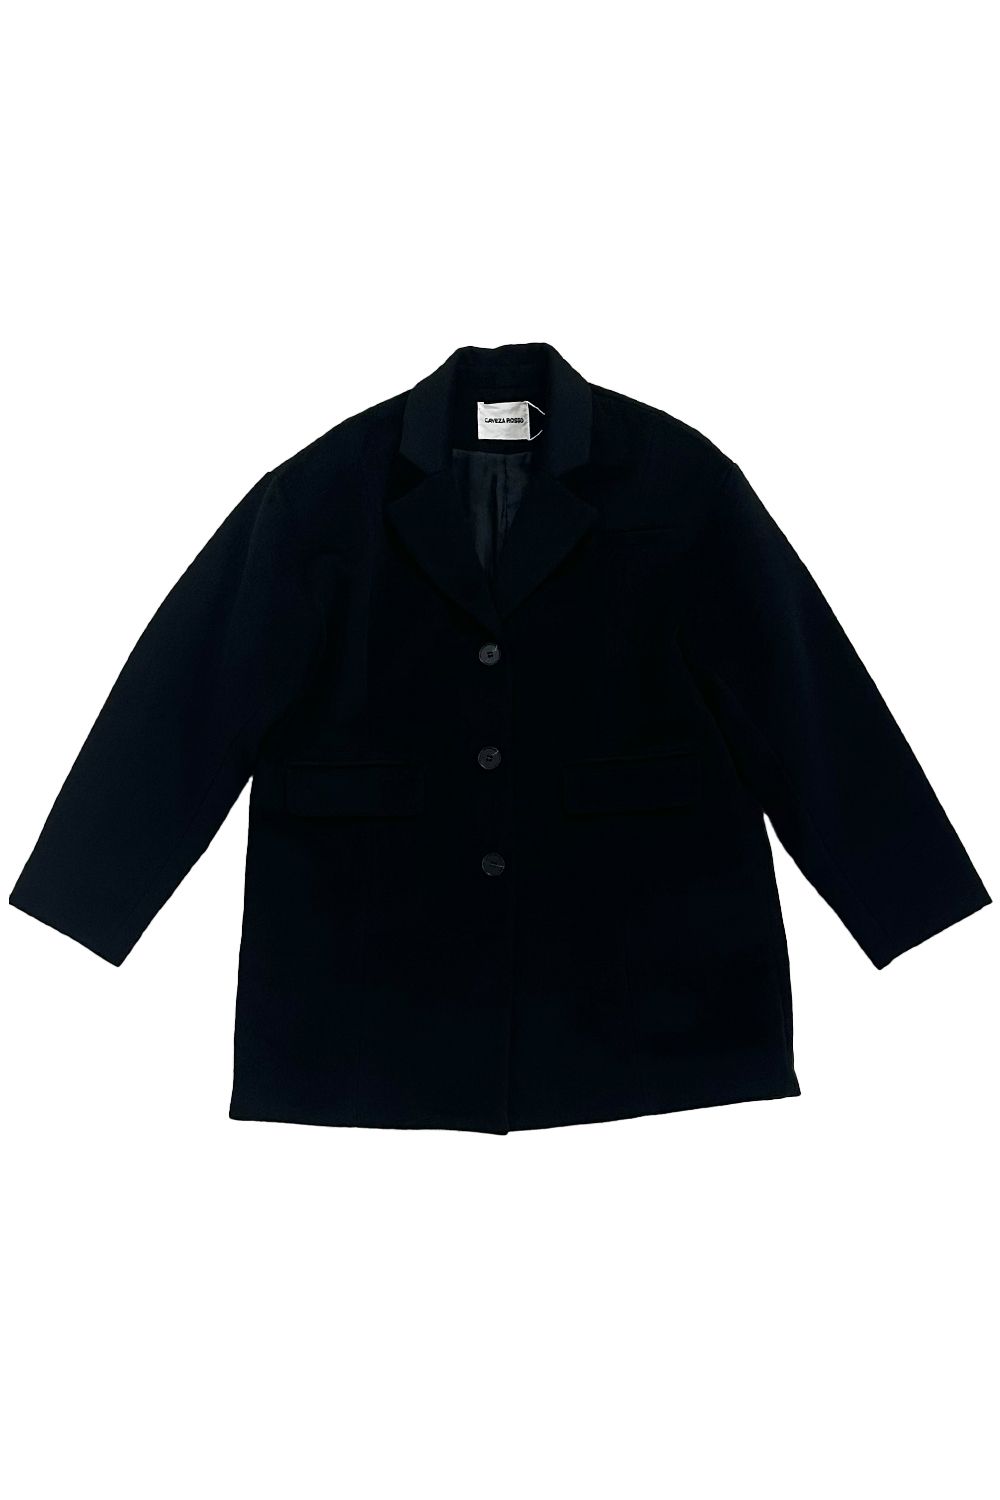 CAVEZA ROSSO - OVER SIZE TAILORED COLLAR JACKET / オーバーサイズ ...